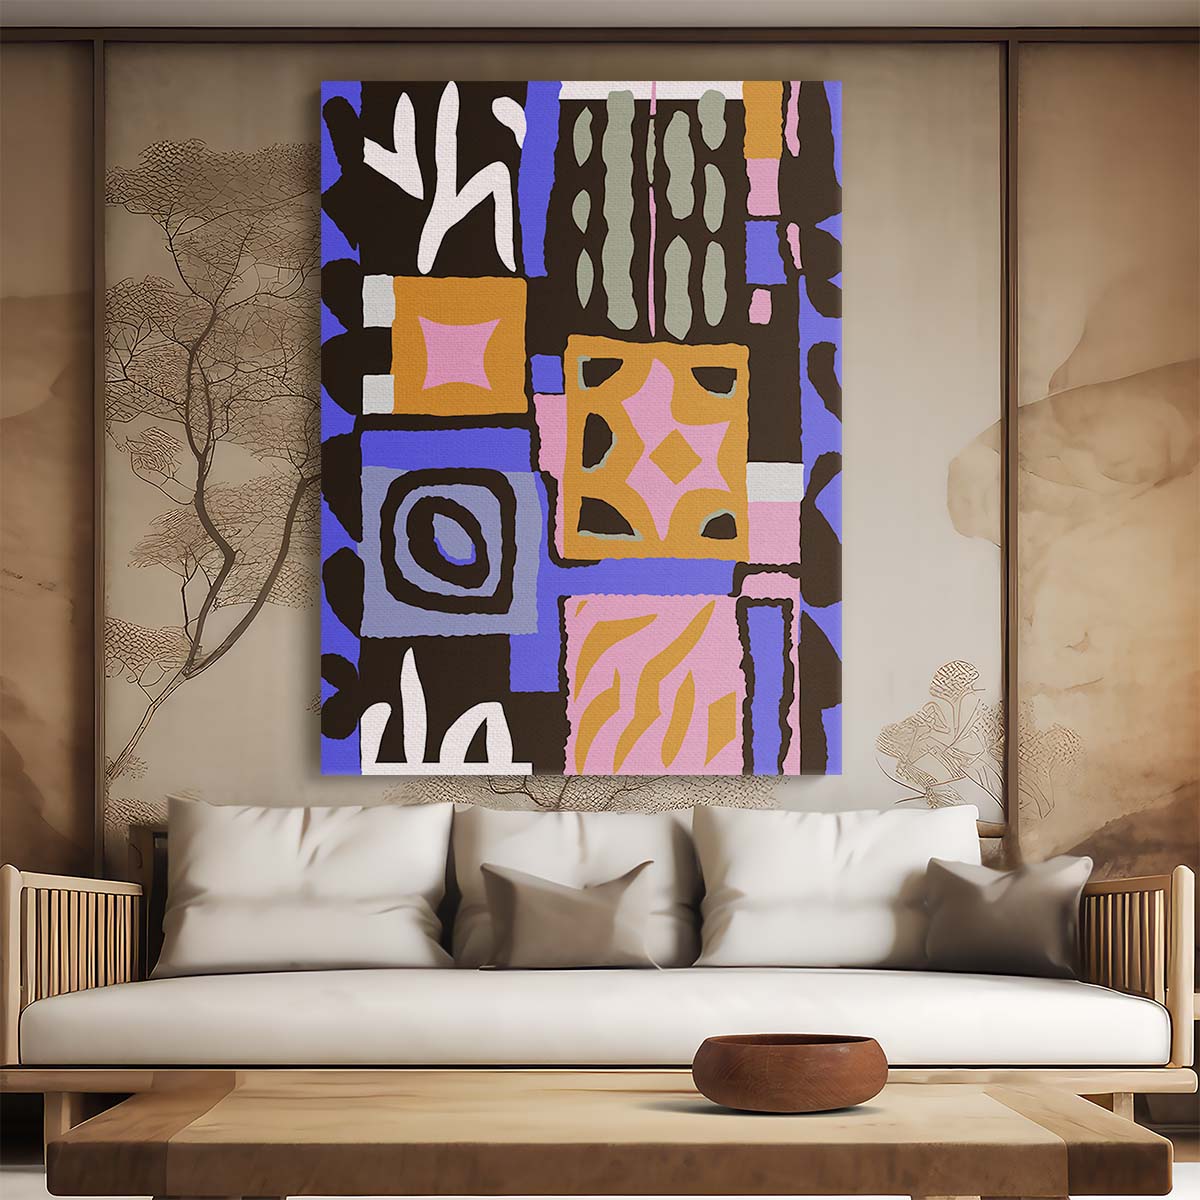 Abstract Geometric Peru Pattern Colorful Purple and Orange Illustration by Treechild by Luxuriance Designs, made in USA